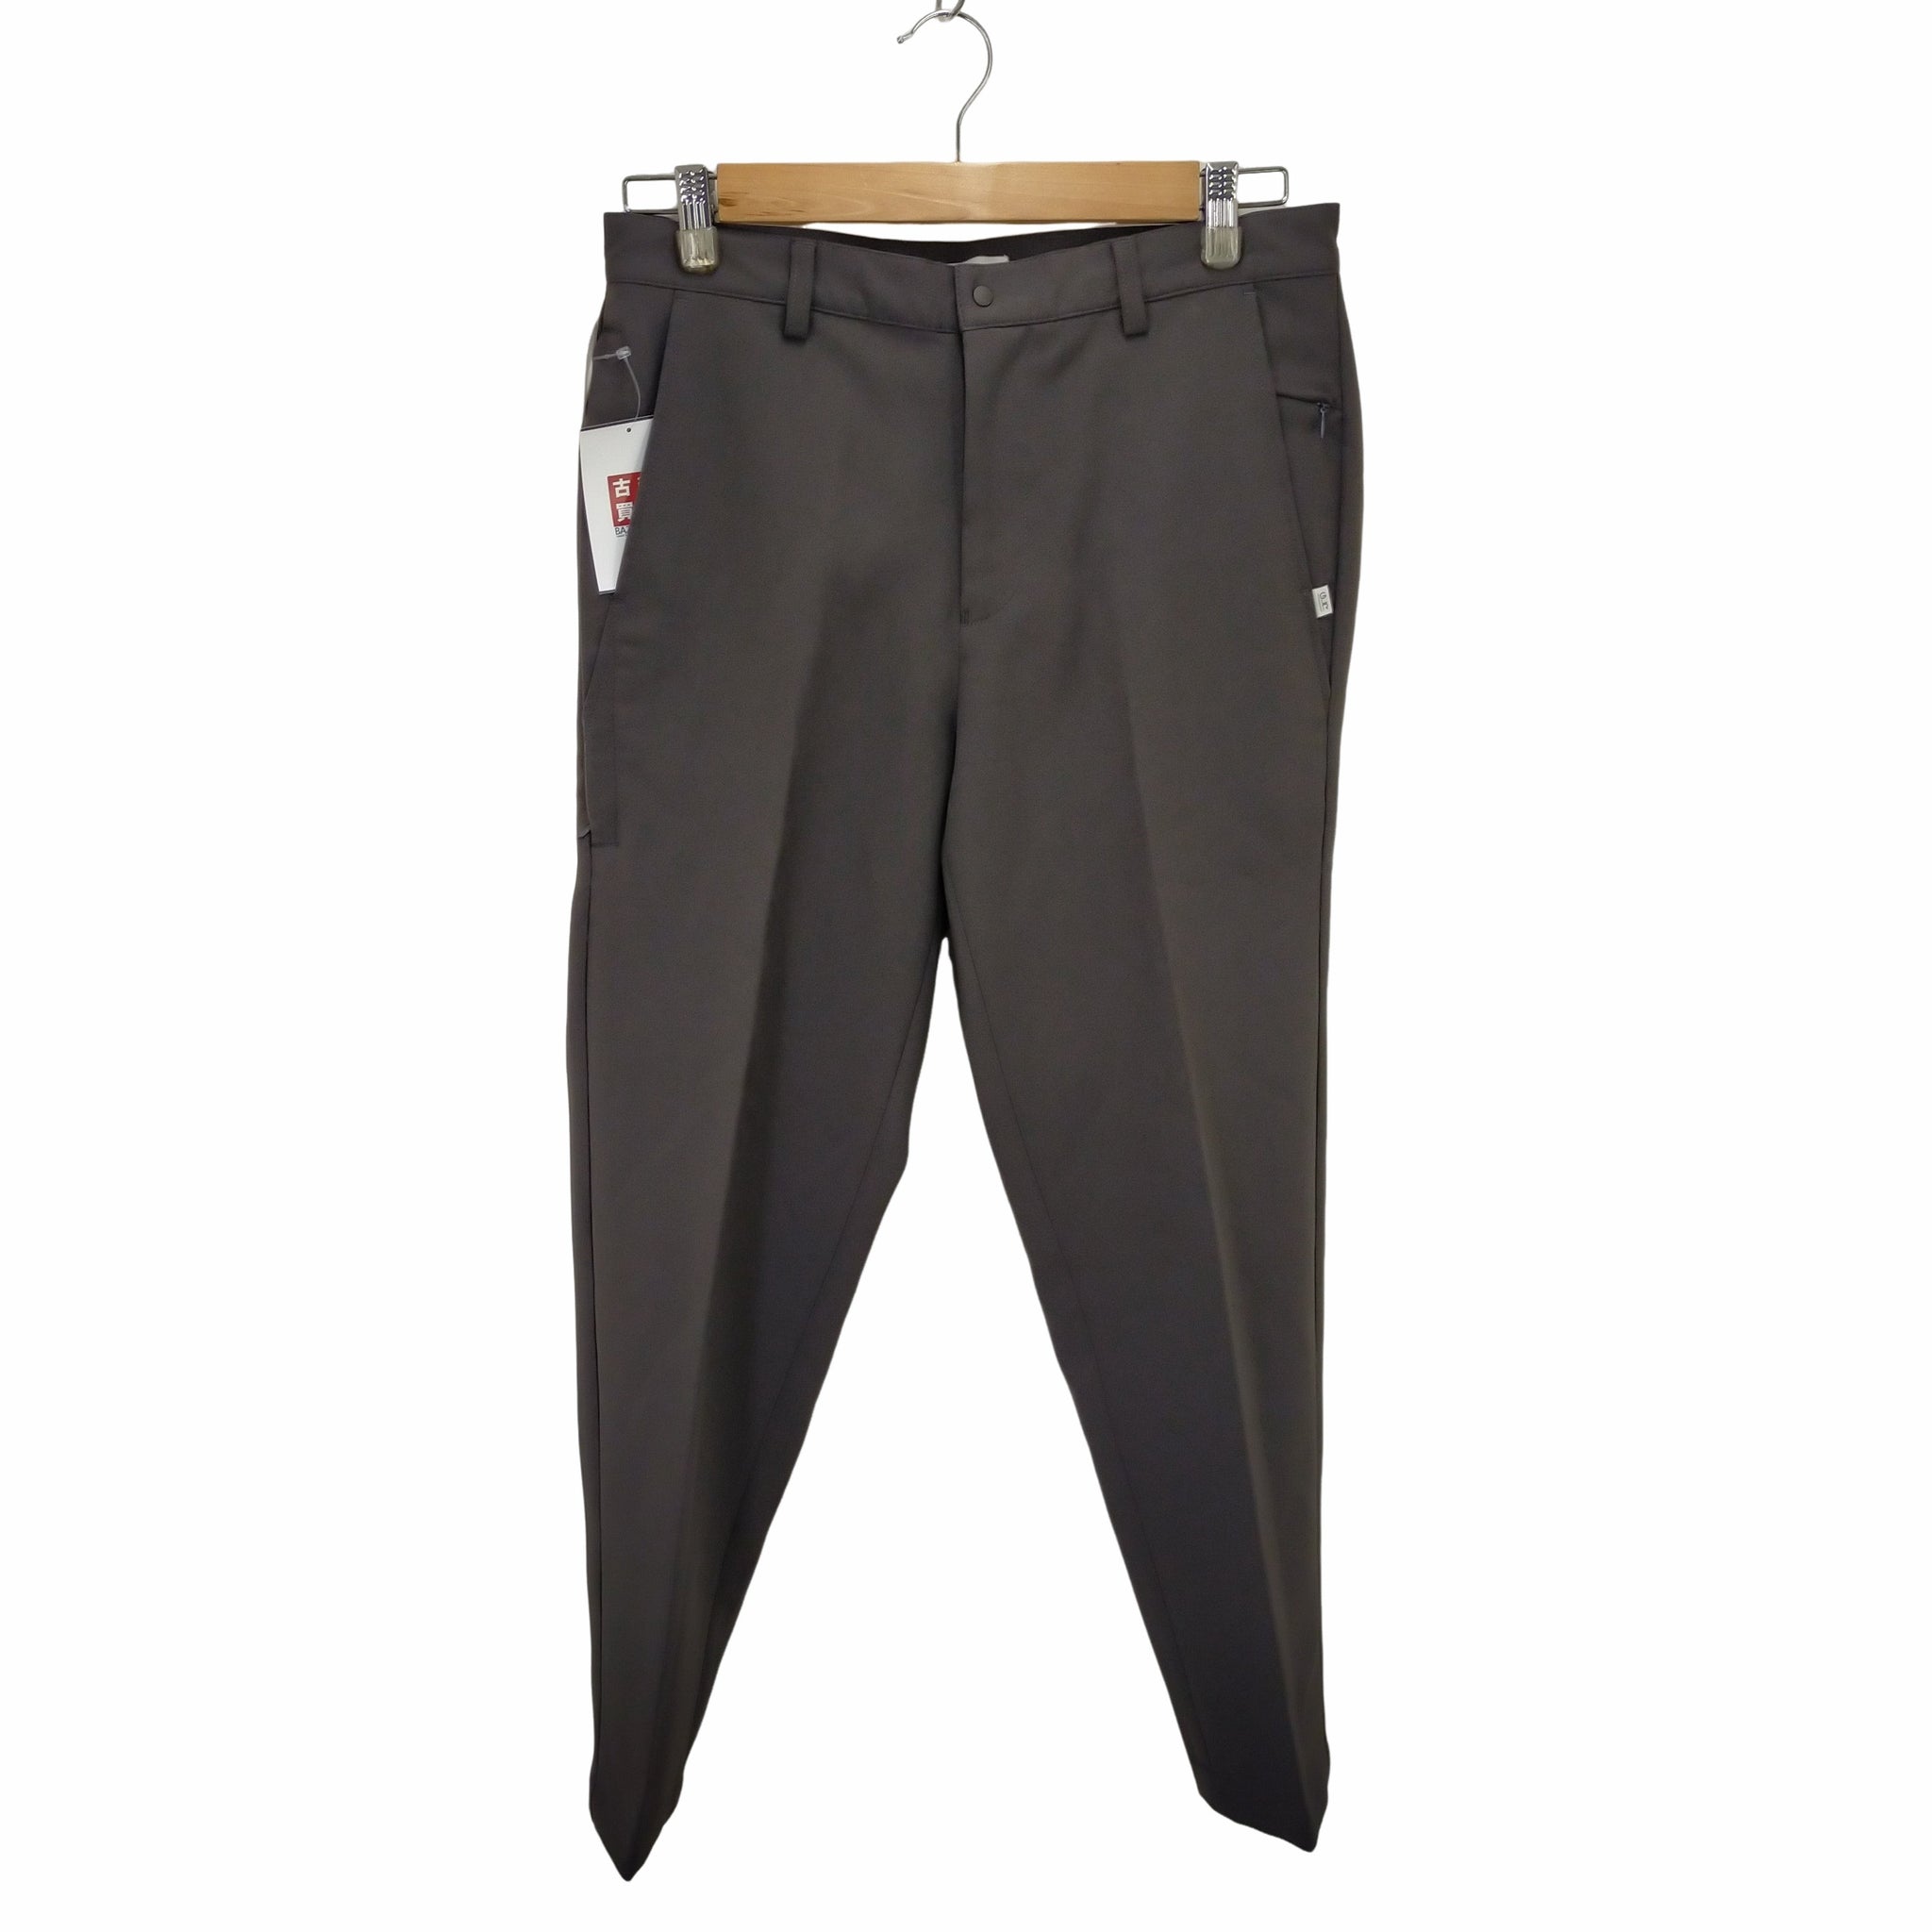 UNITED ARROWS green label relaxing(ユナイテッドアローズグリーンレーベルリラクシング)Livelihood/Mover(S) Pants